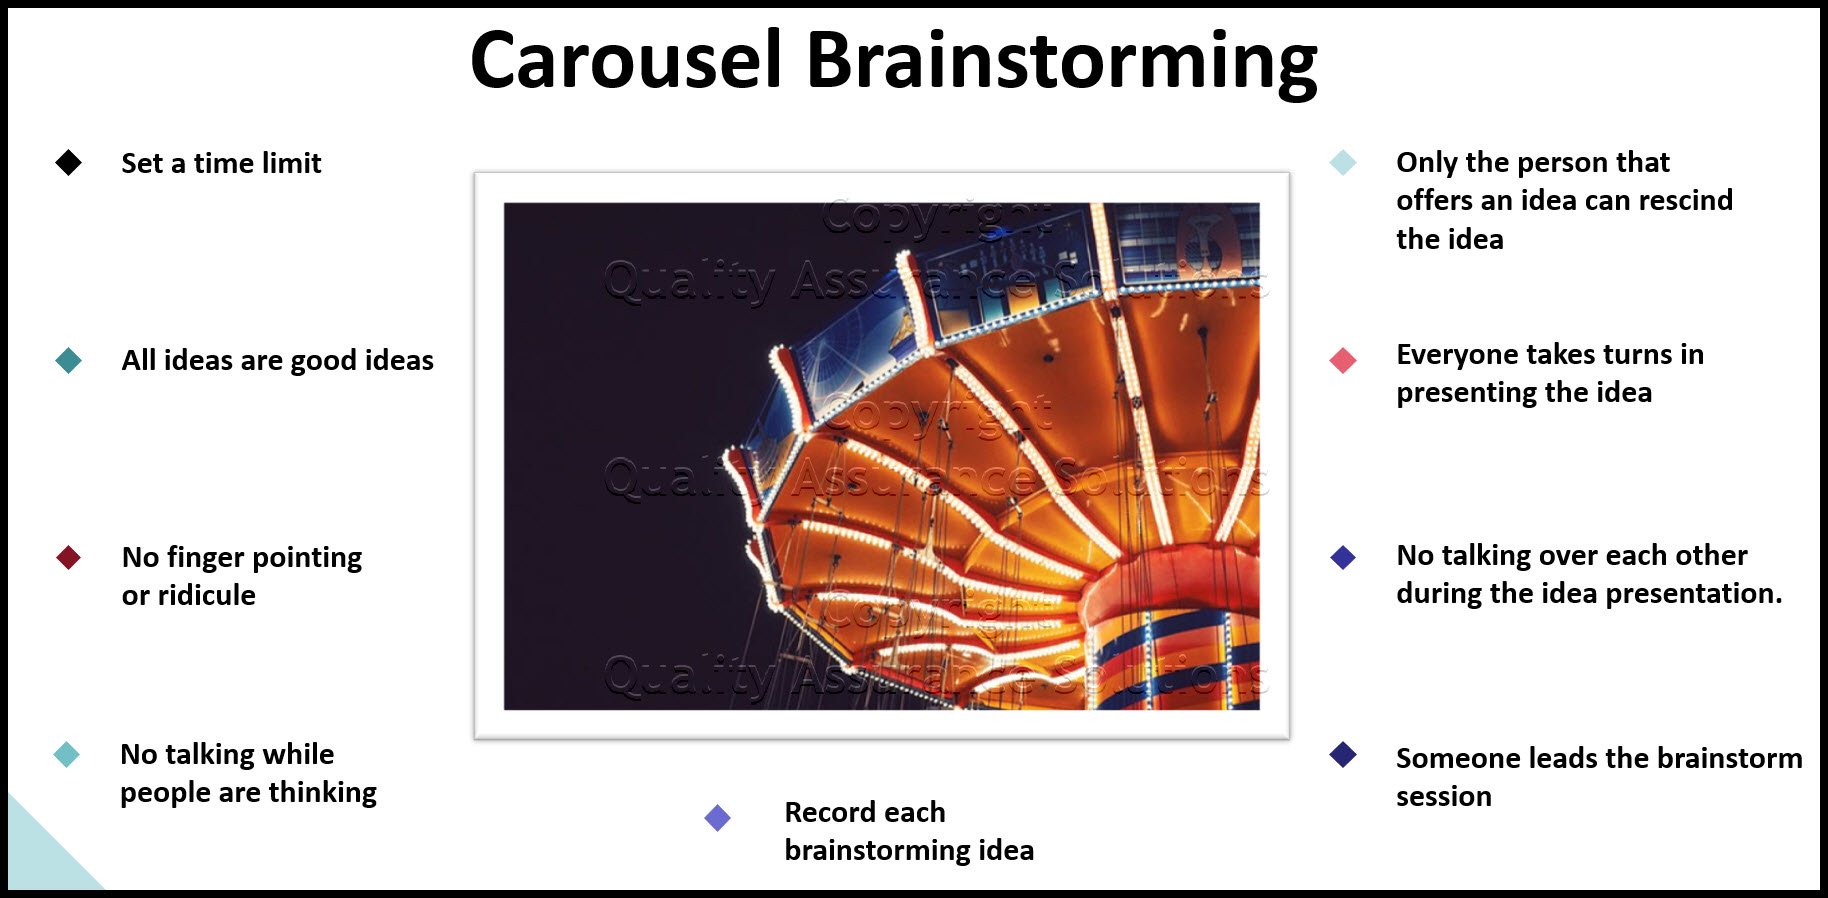 Carousel brainstorming is ideal for group idea generation and ideal for getting a better understanding of the knowledge level of all those involved. 